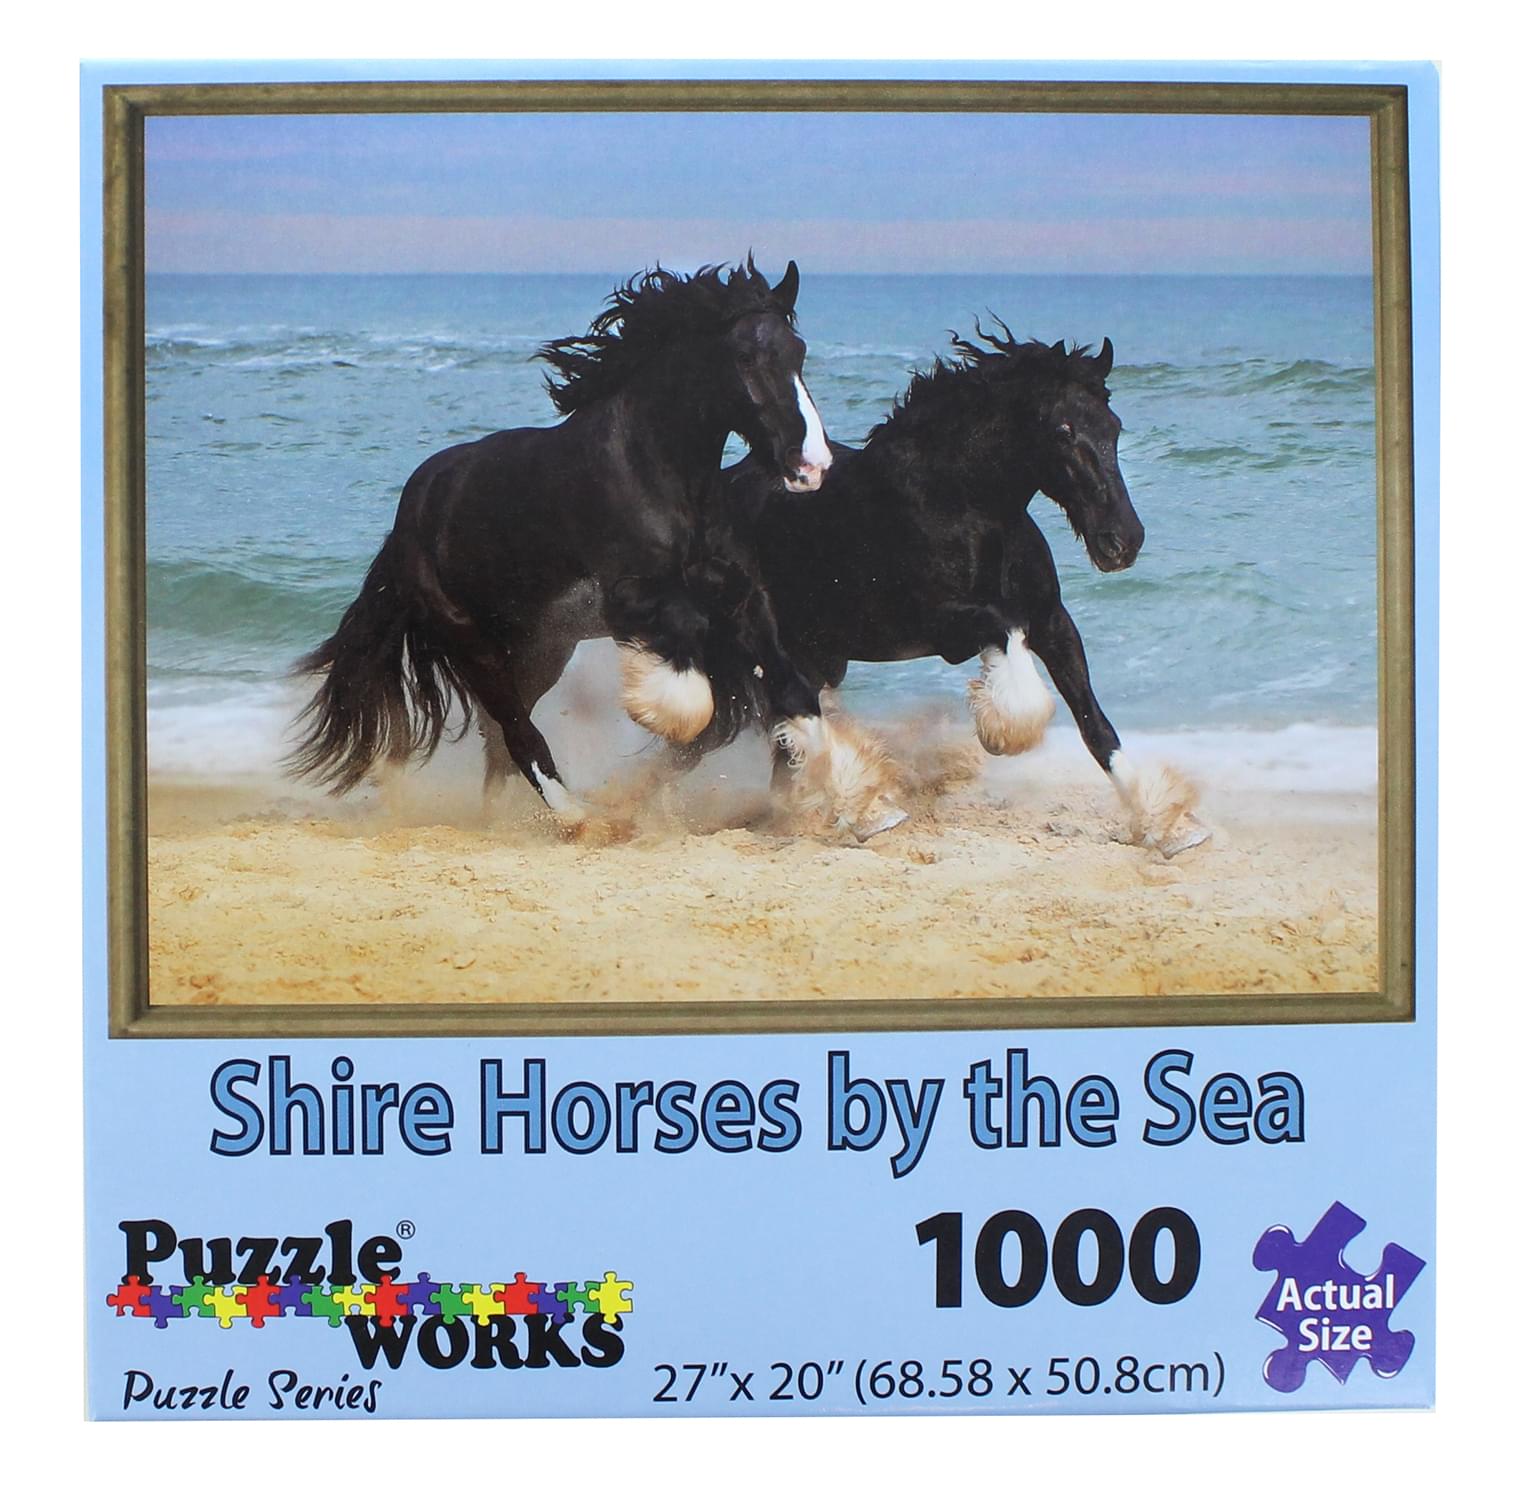 PuzzleWorks 1000 Piece Jigsaw Puzzle , Shire Horse By The Sea